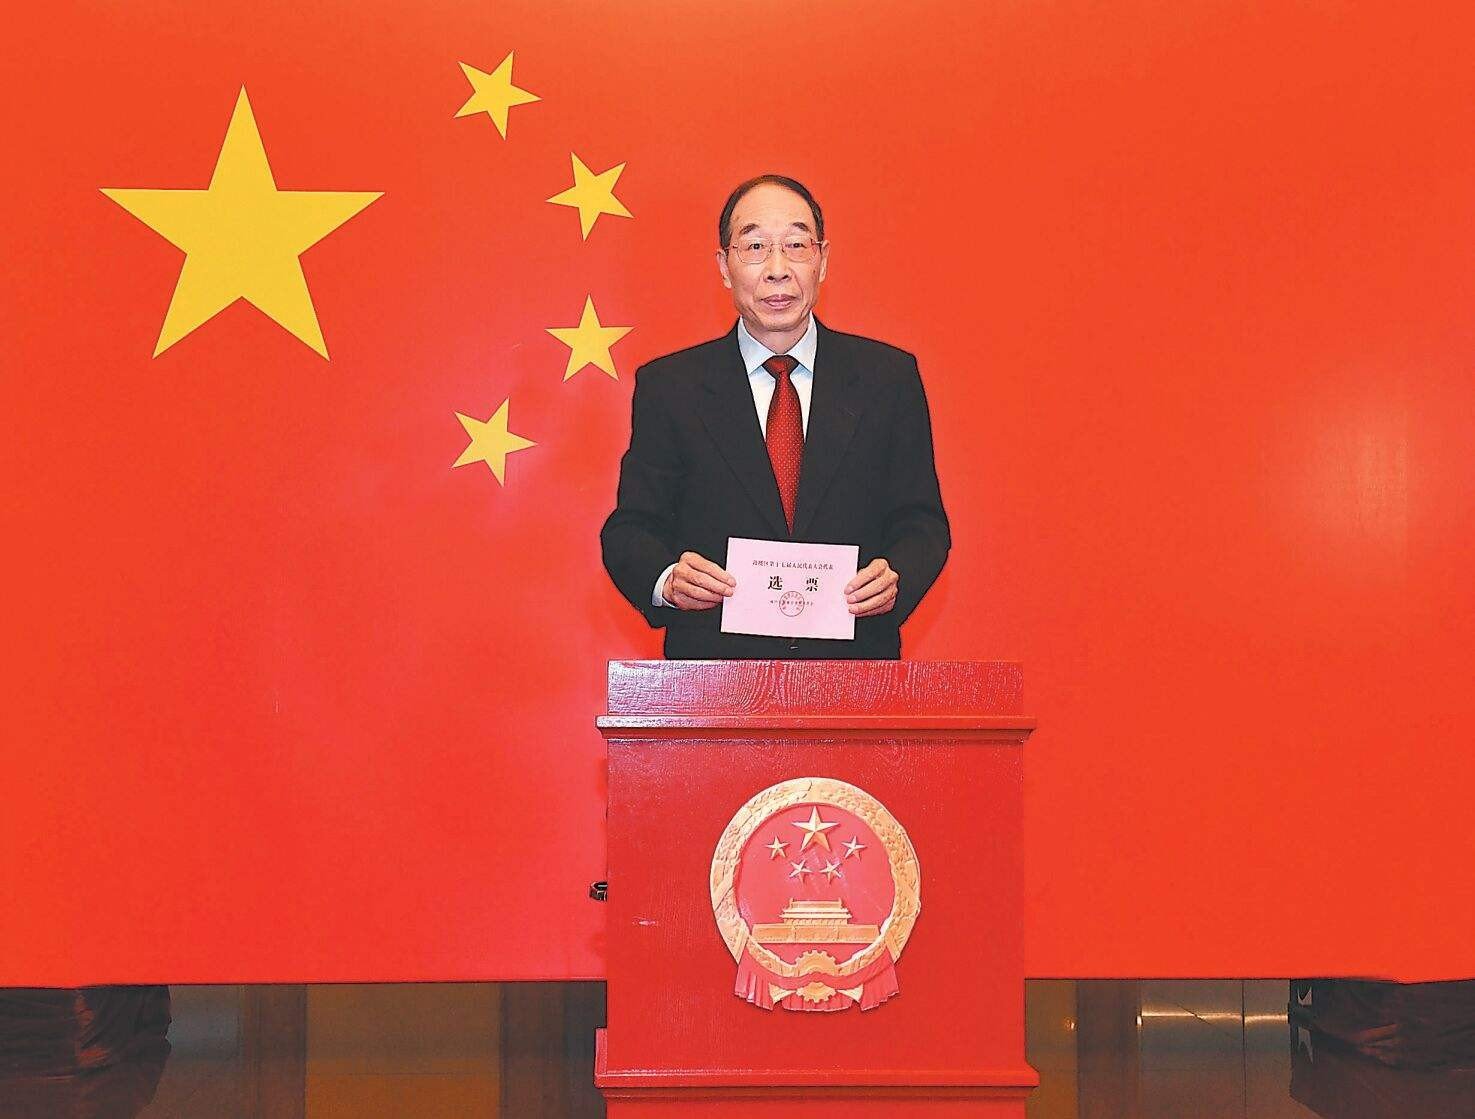 You Quan had previously dealt with Hong Kong groups as party chief in Fujian, Photo: Handout.